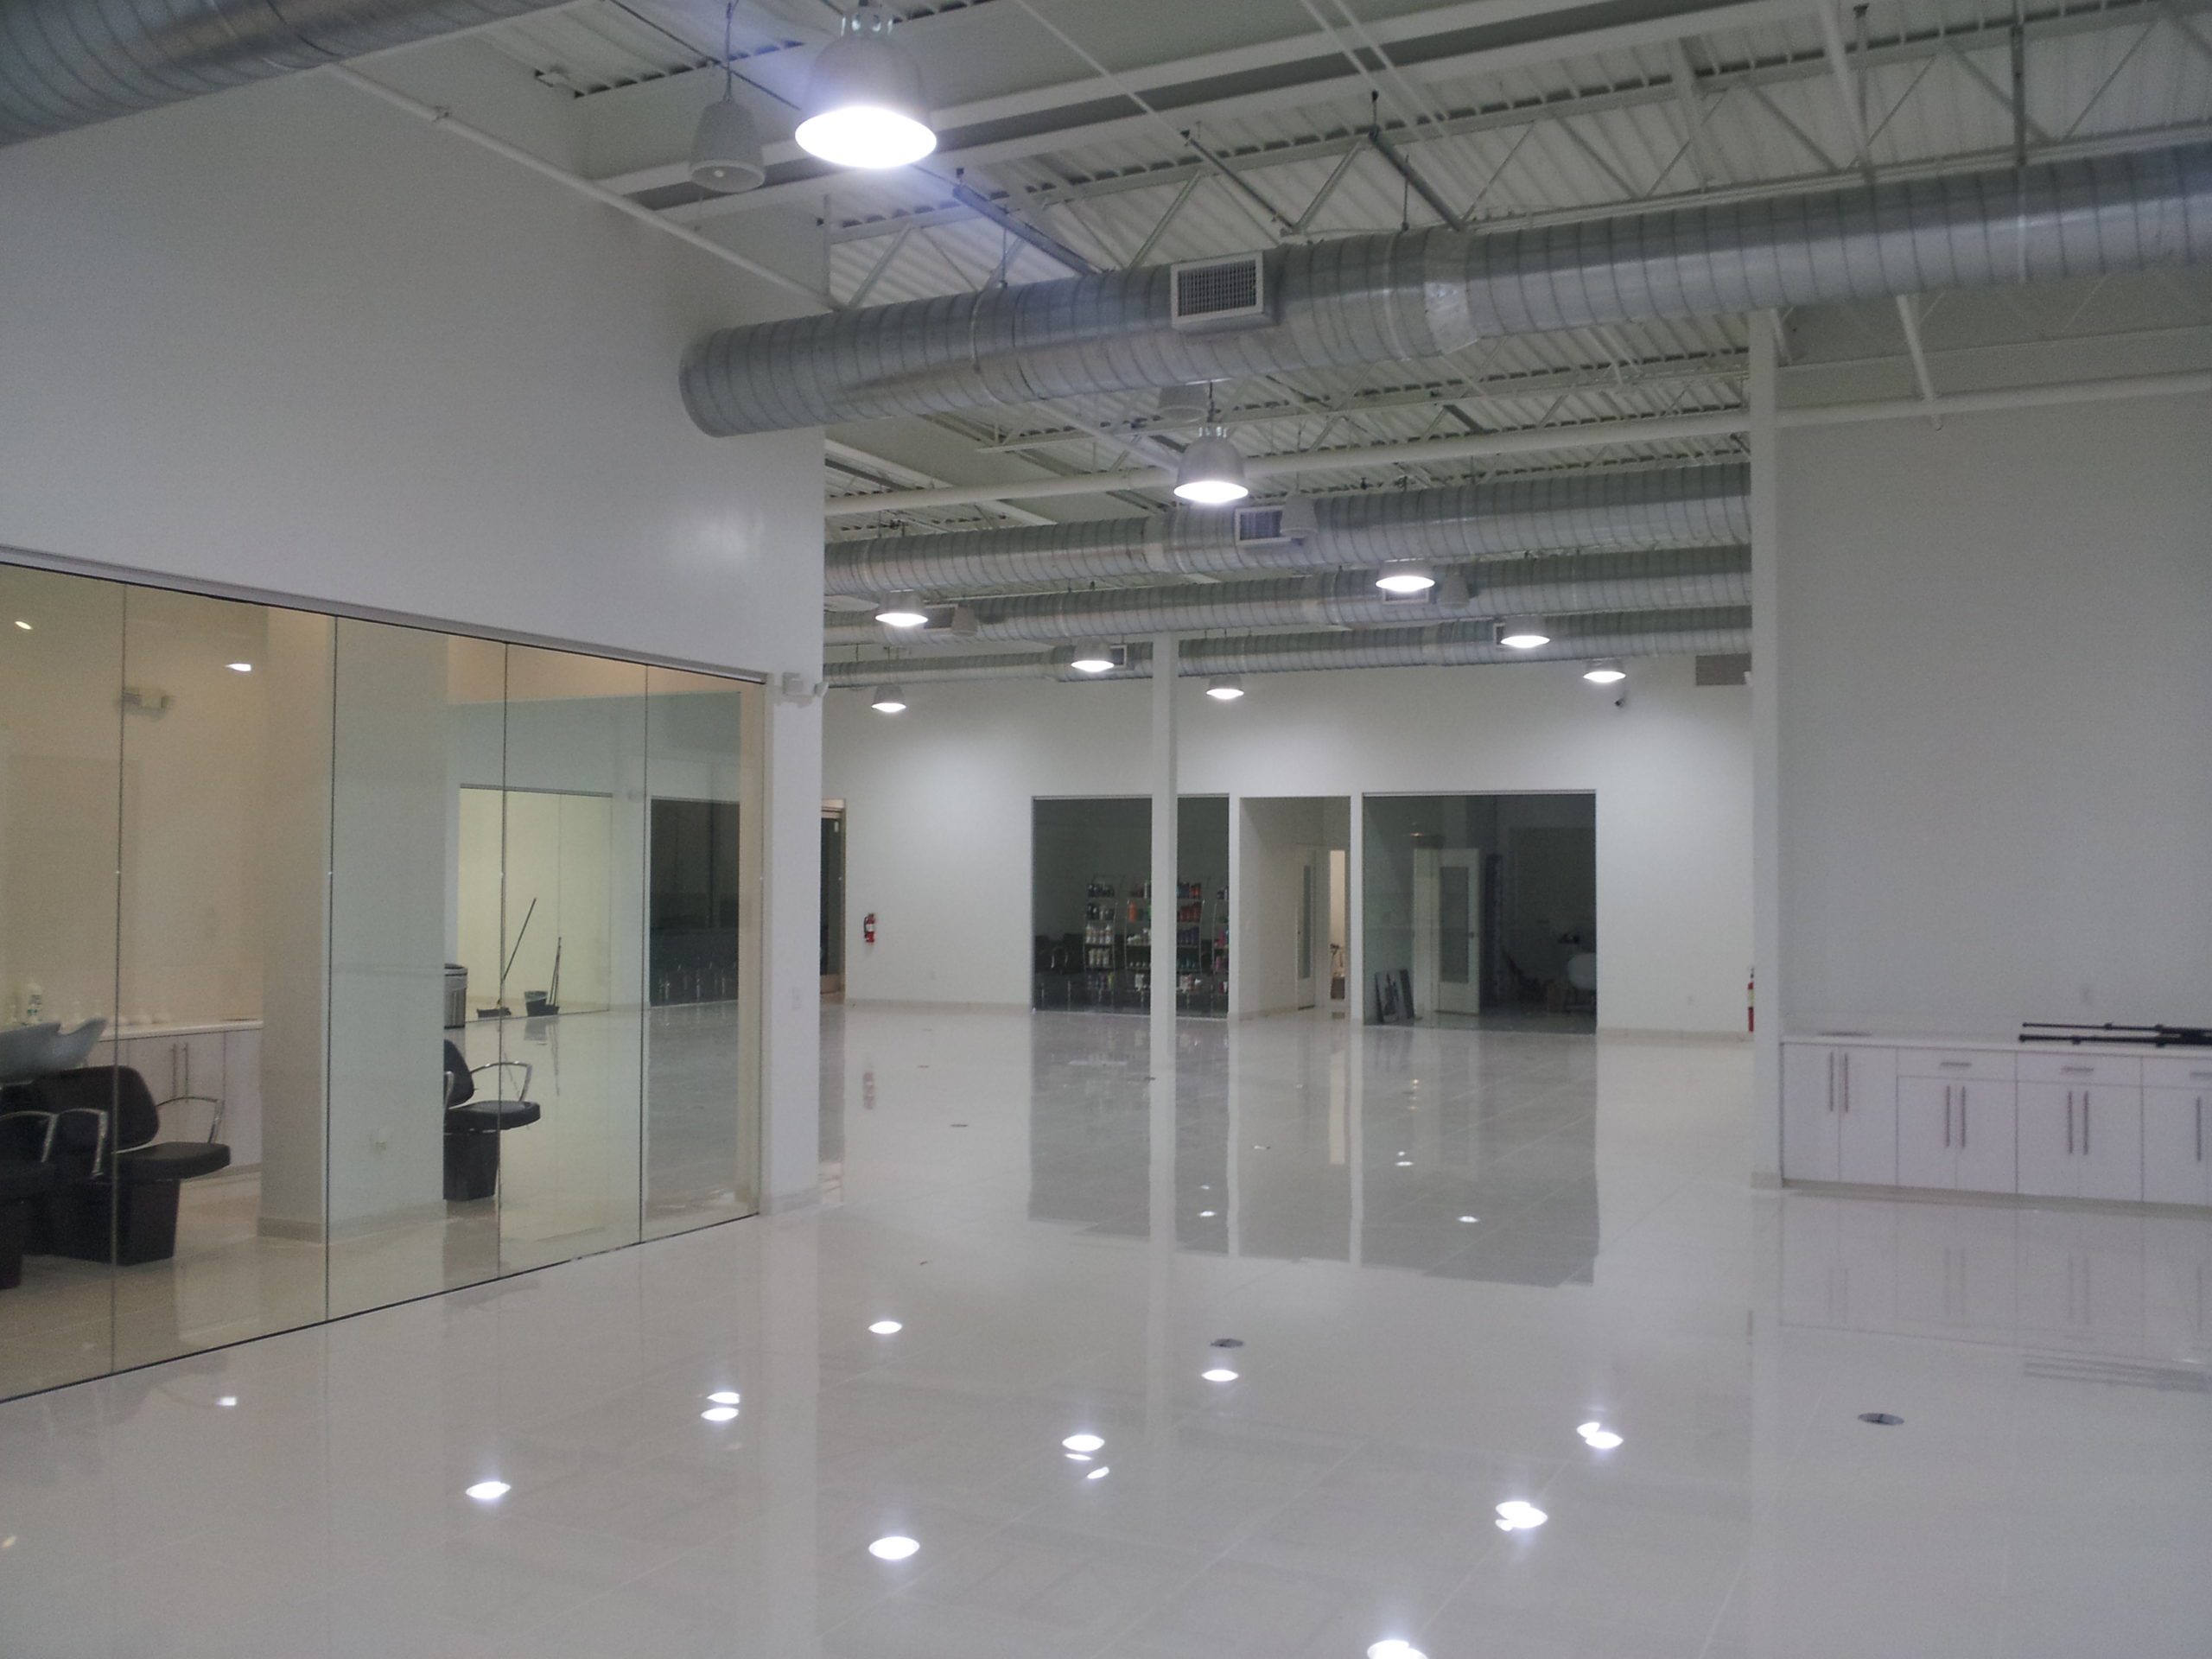 A large, open room with tall ceilings and white walls.